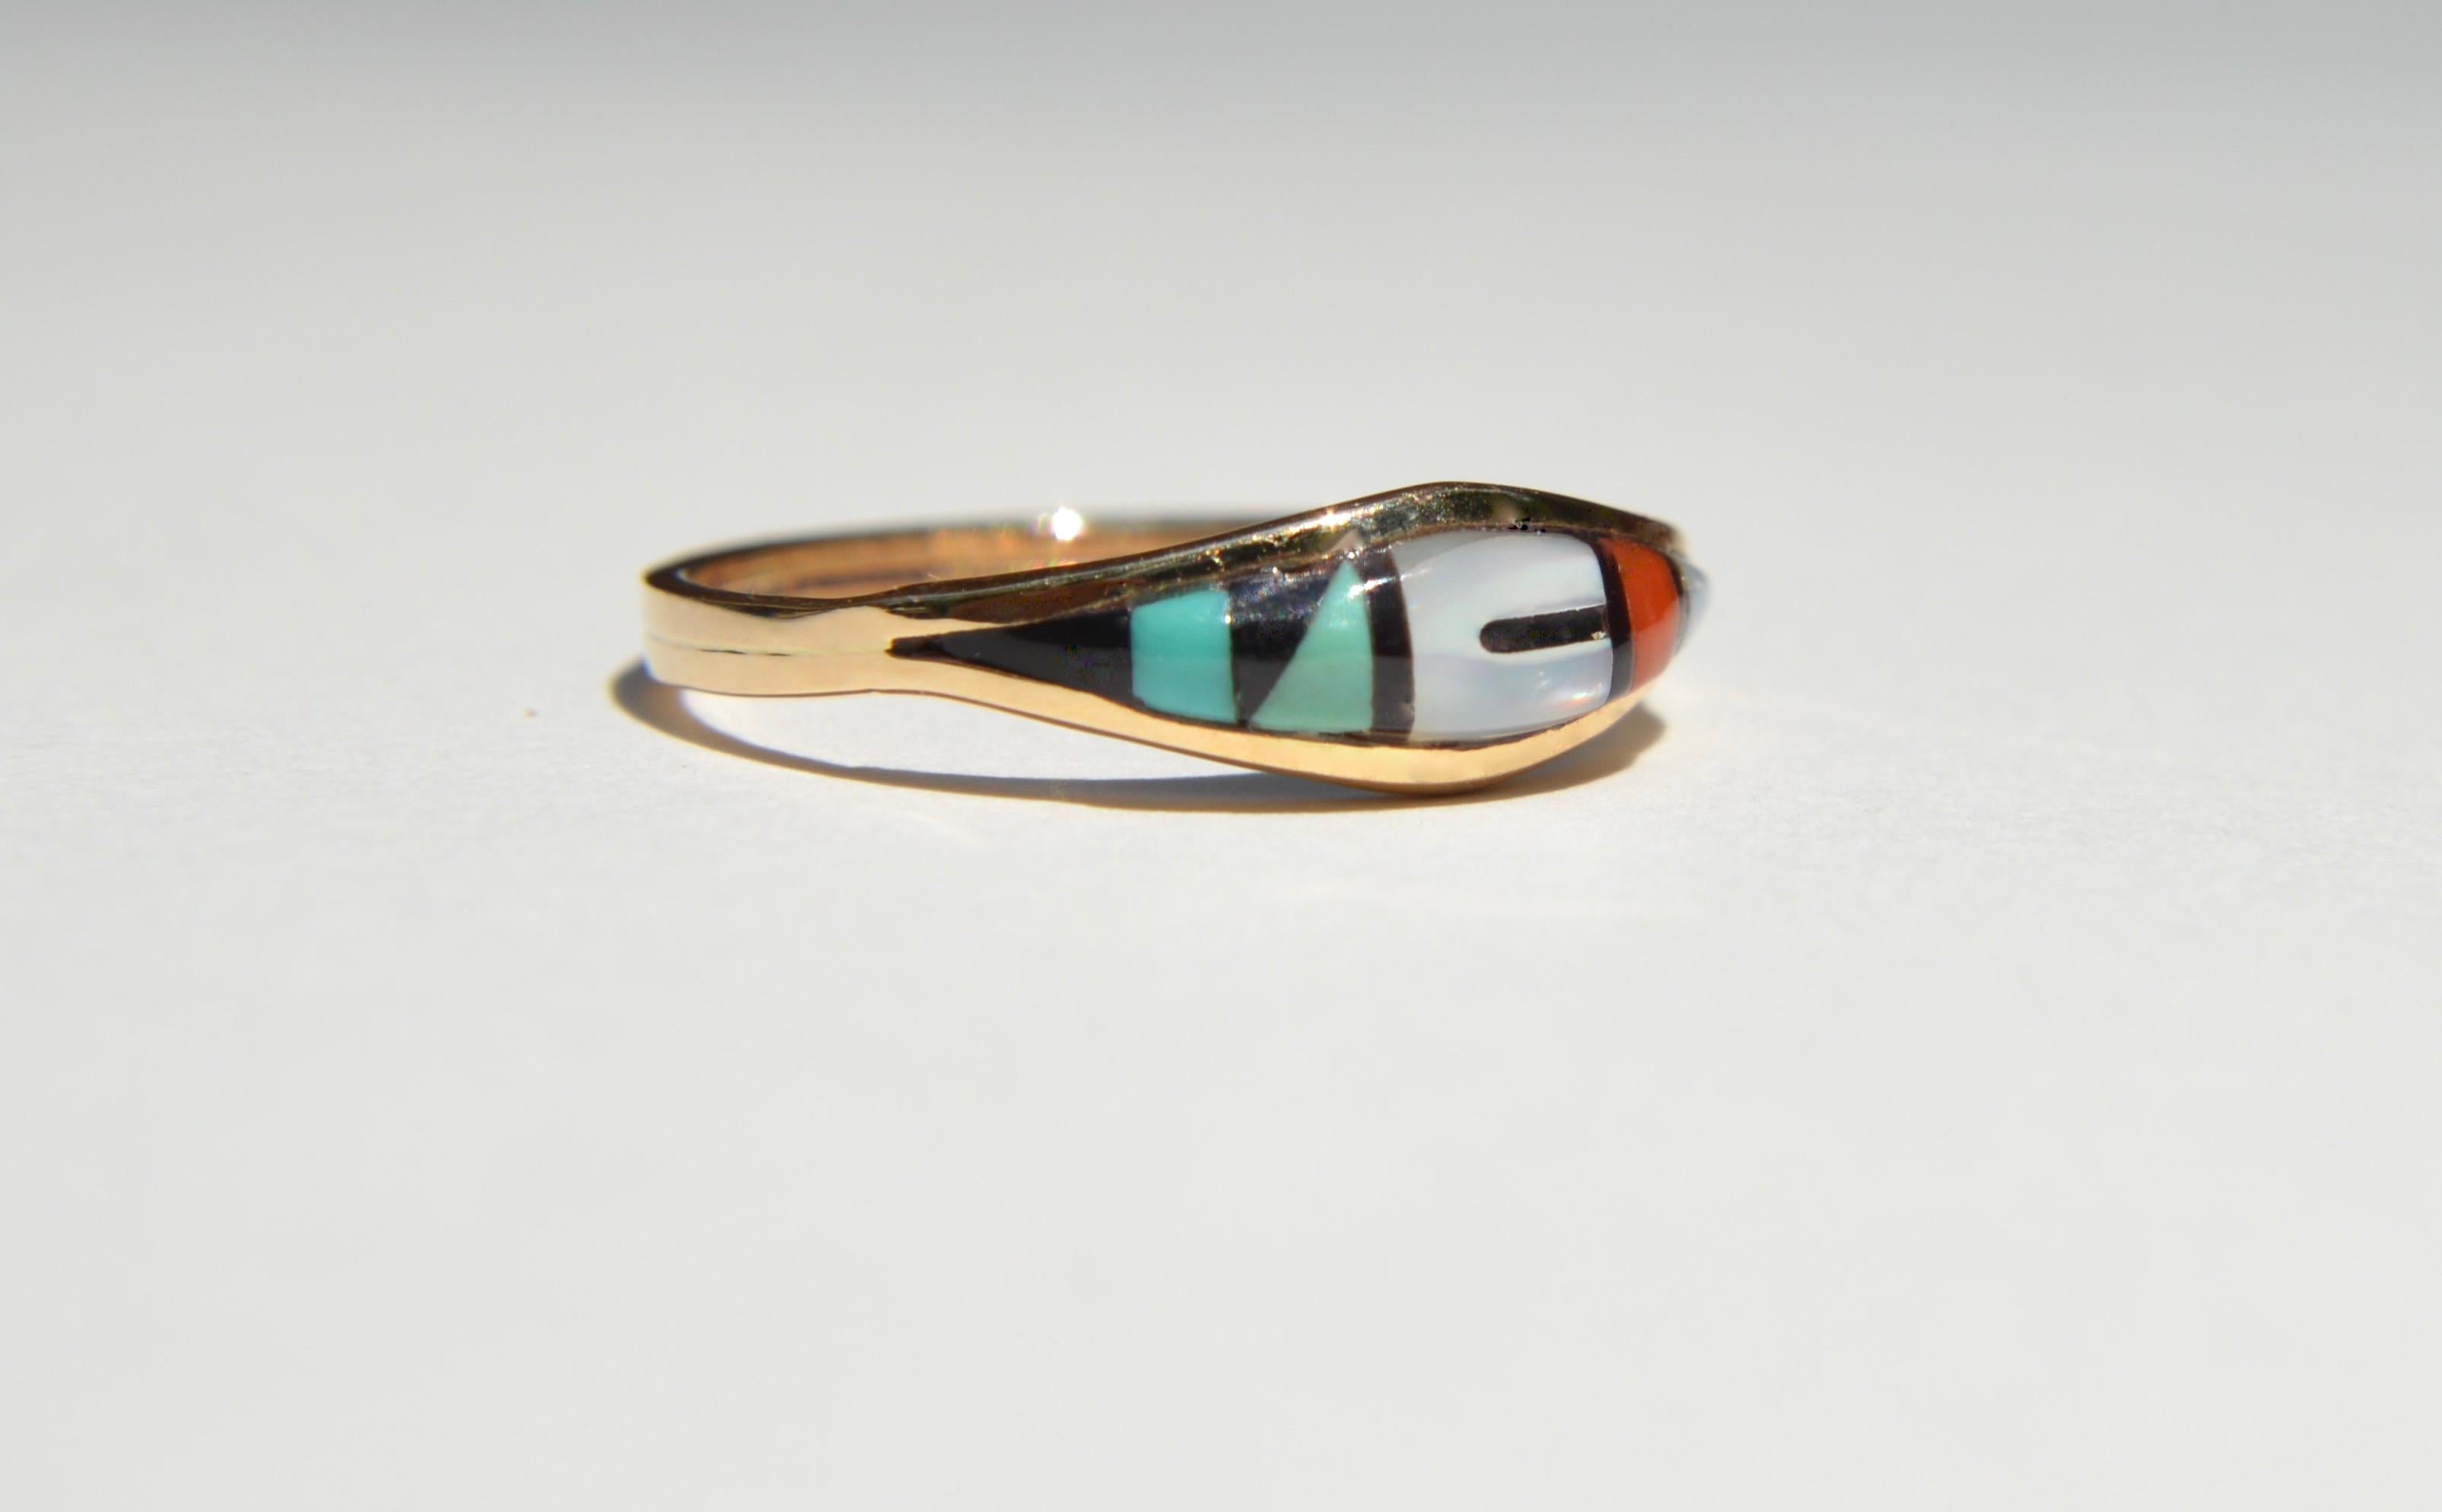 Vintage c1980s 14K yellow gold deadstock Navajo inlay band with onyx, turquoise, red coral and mother of pearl. Size 7.25, cannot be resized. In excellent, unworn condition. Ring weighs 1.64 grams. Marked and tested as 14K gold.

All items arrive in